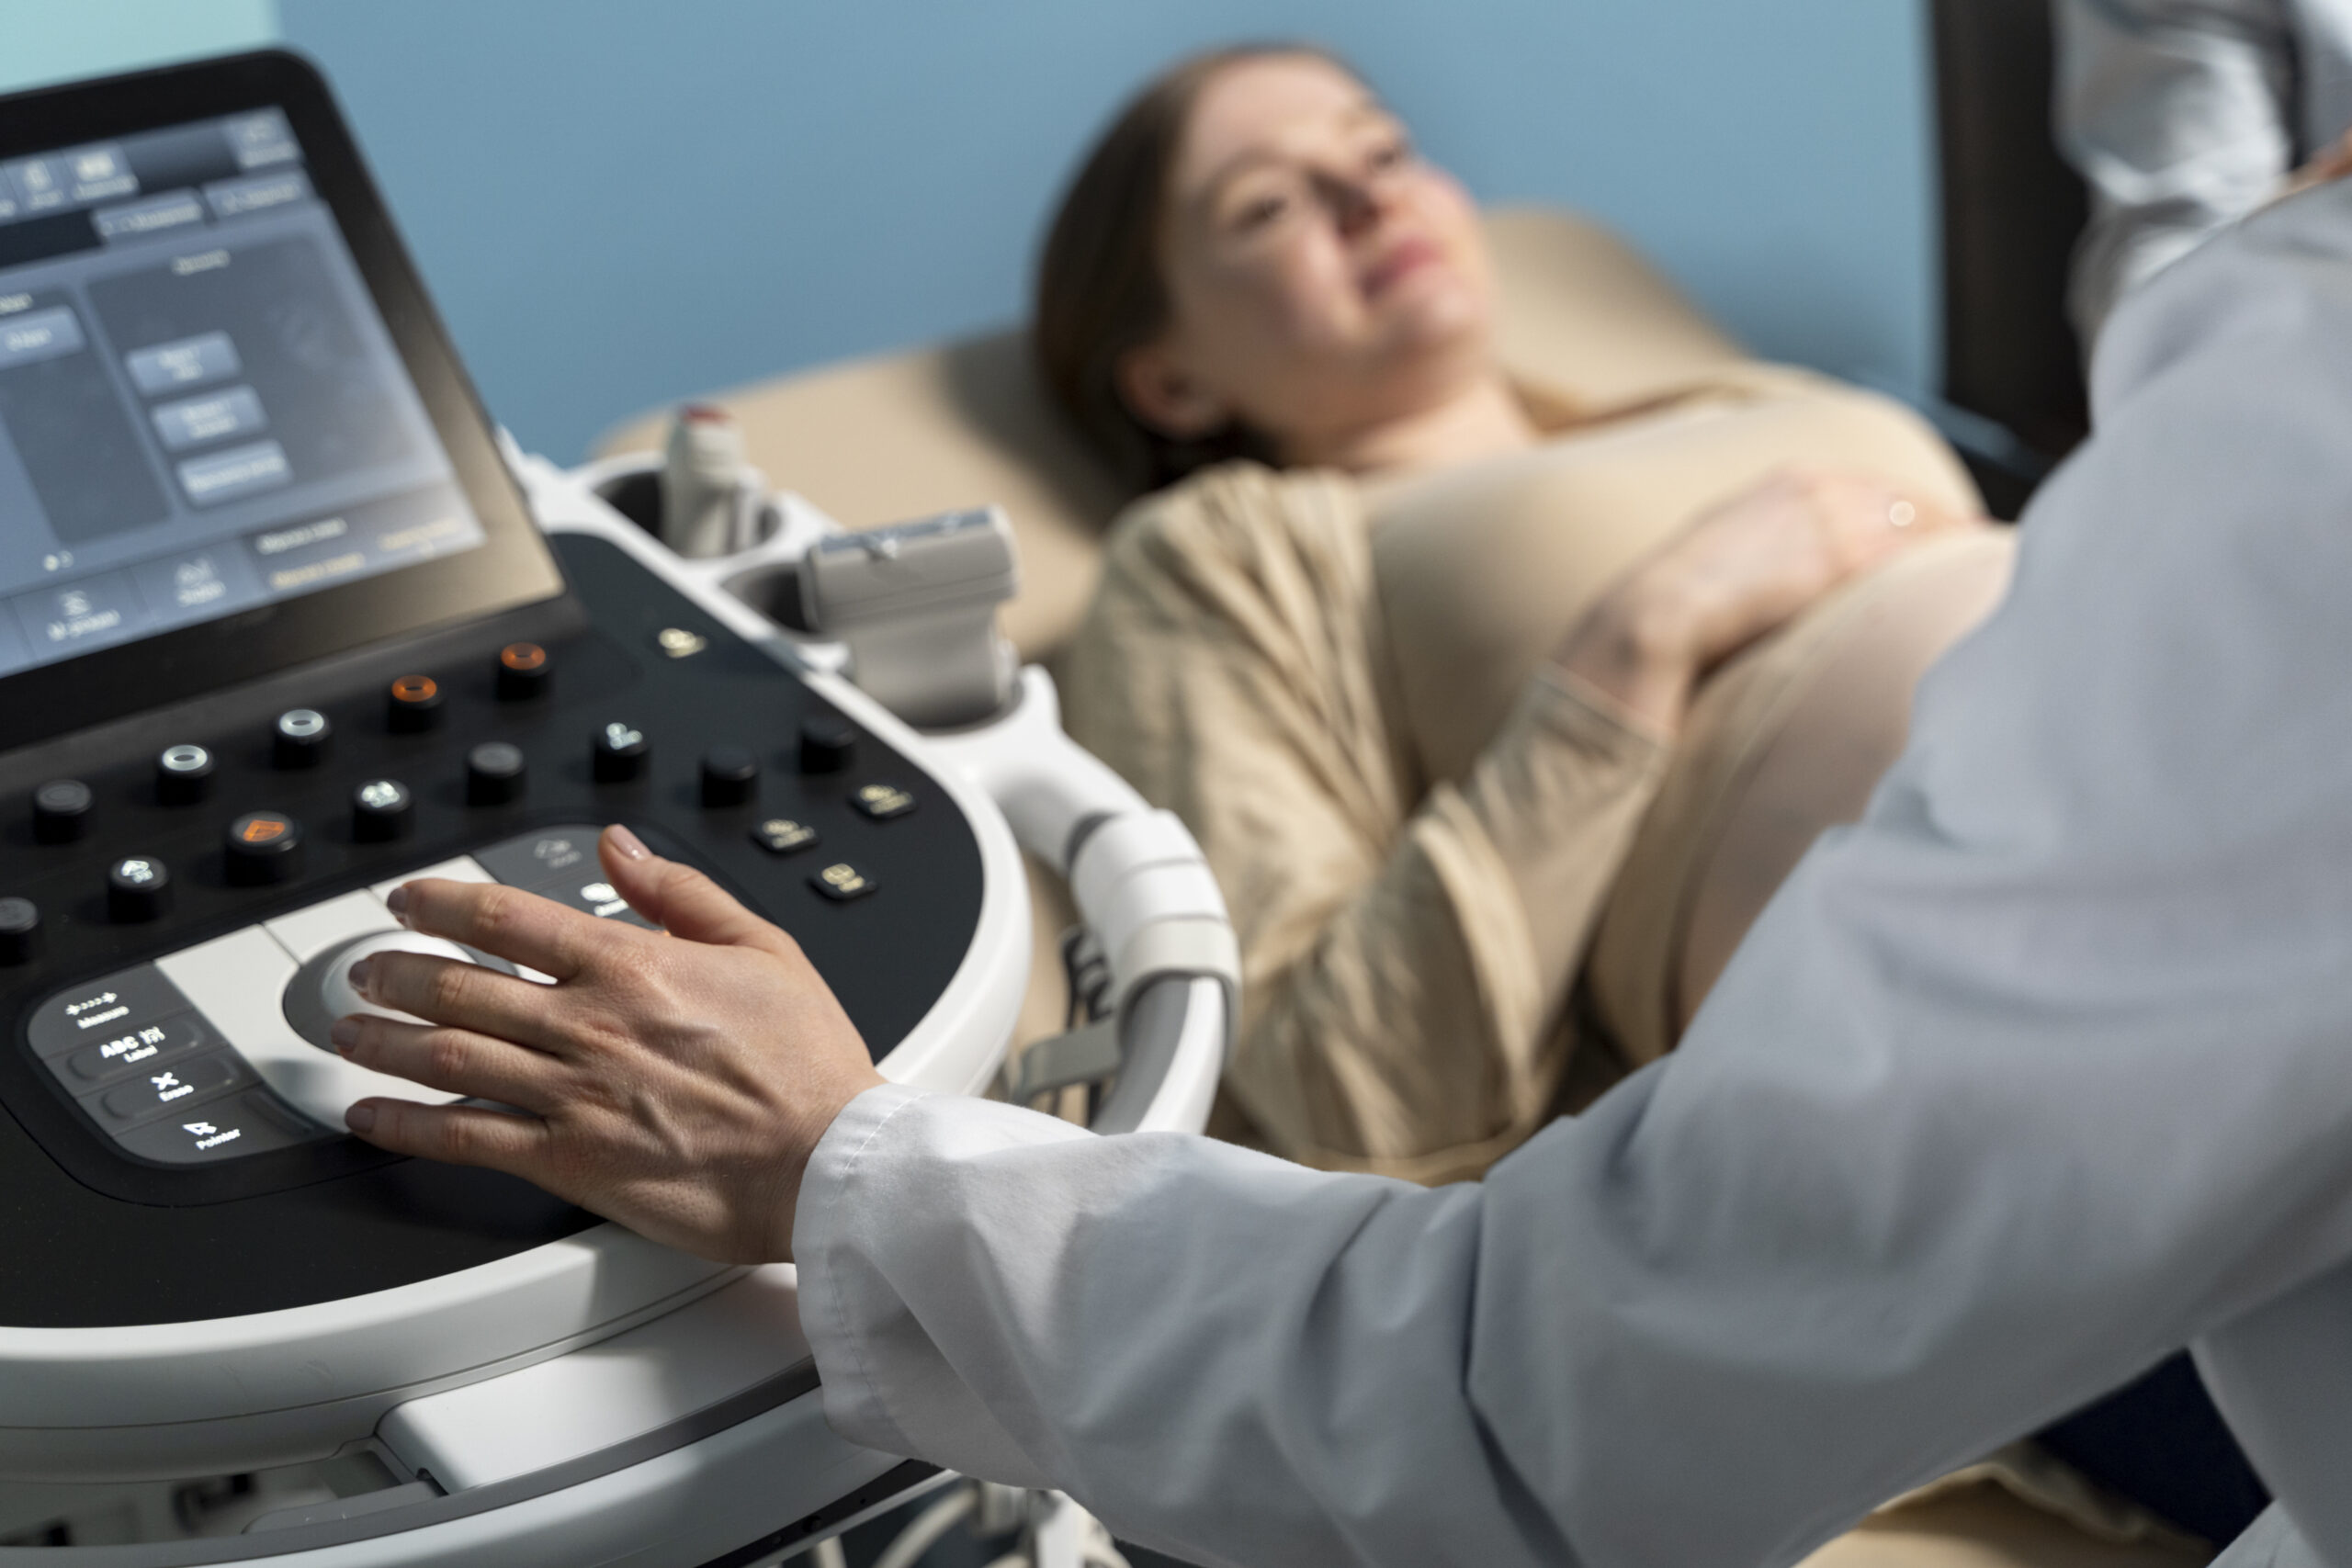 gynecologist-performing-ultrasound-consultation Image by Freepik